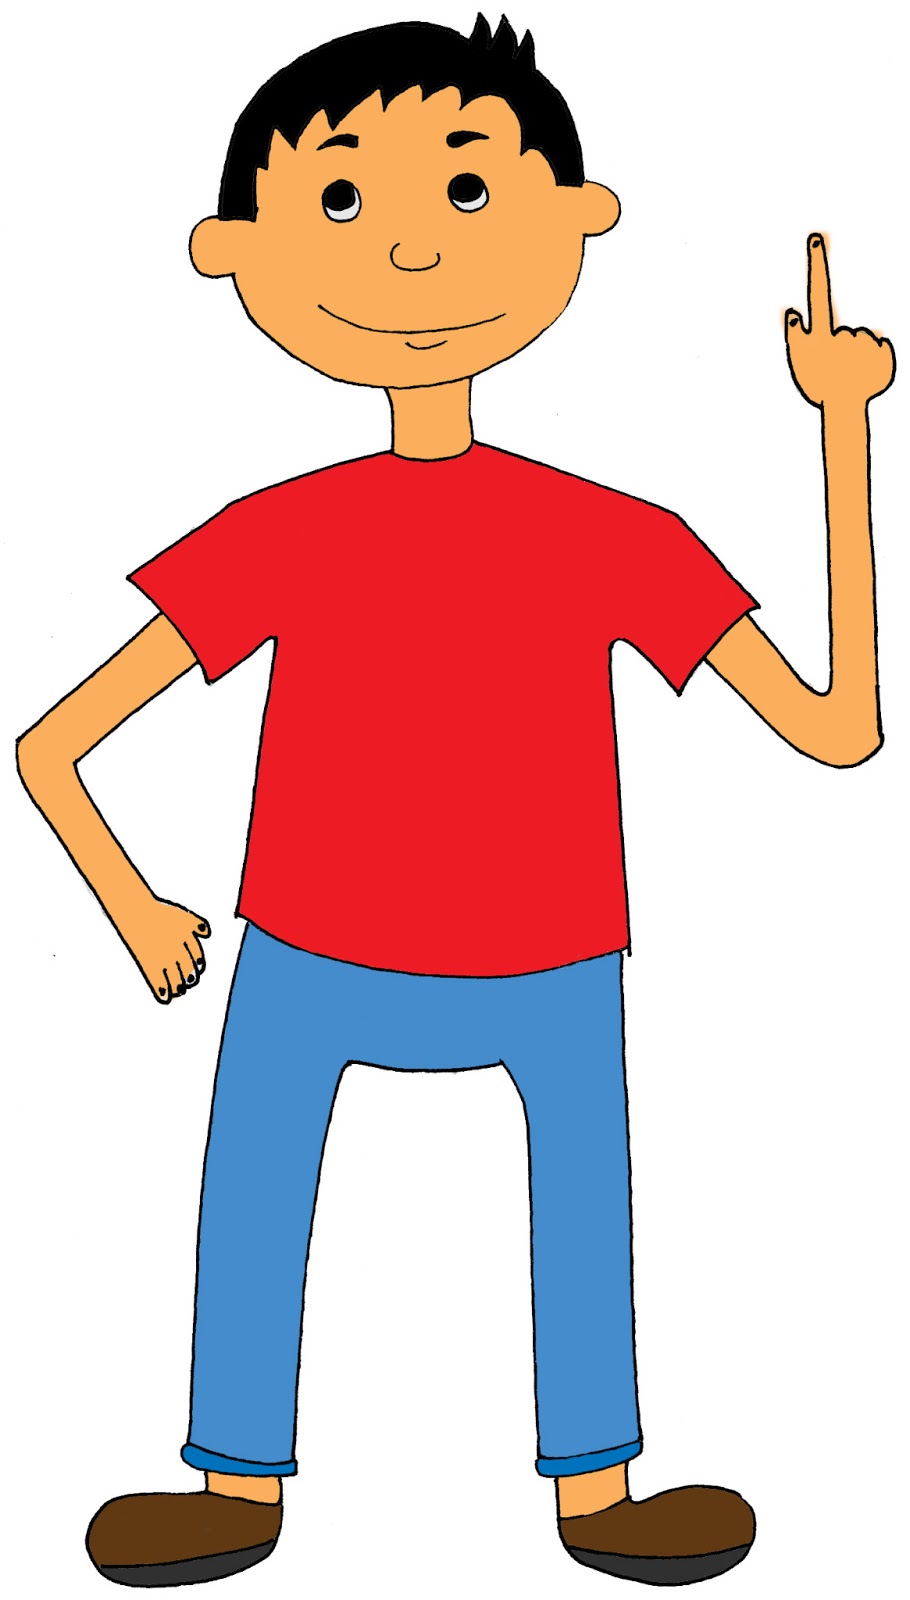 Cartoon boys free clip art. Posted by ryan No comments: · Email ThisBlogThis!Share to TwitterShare to FacebookShare to Pinterest